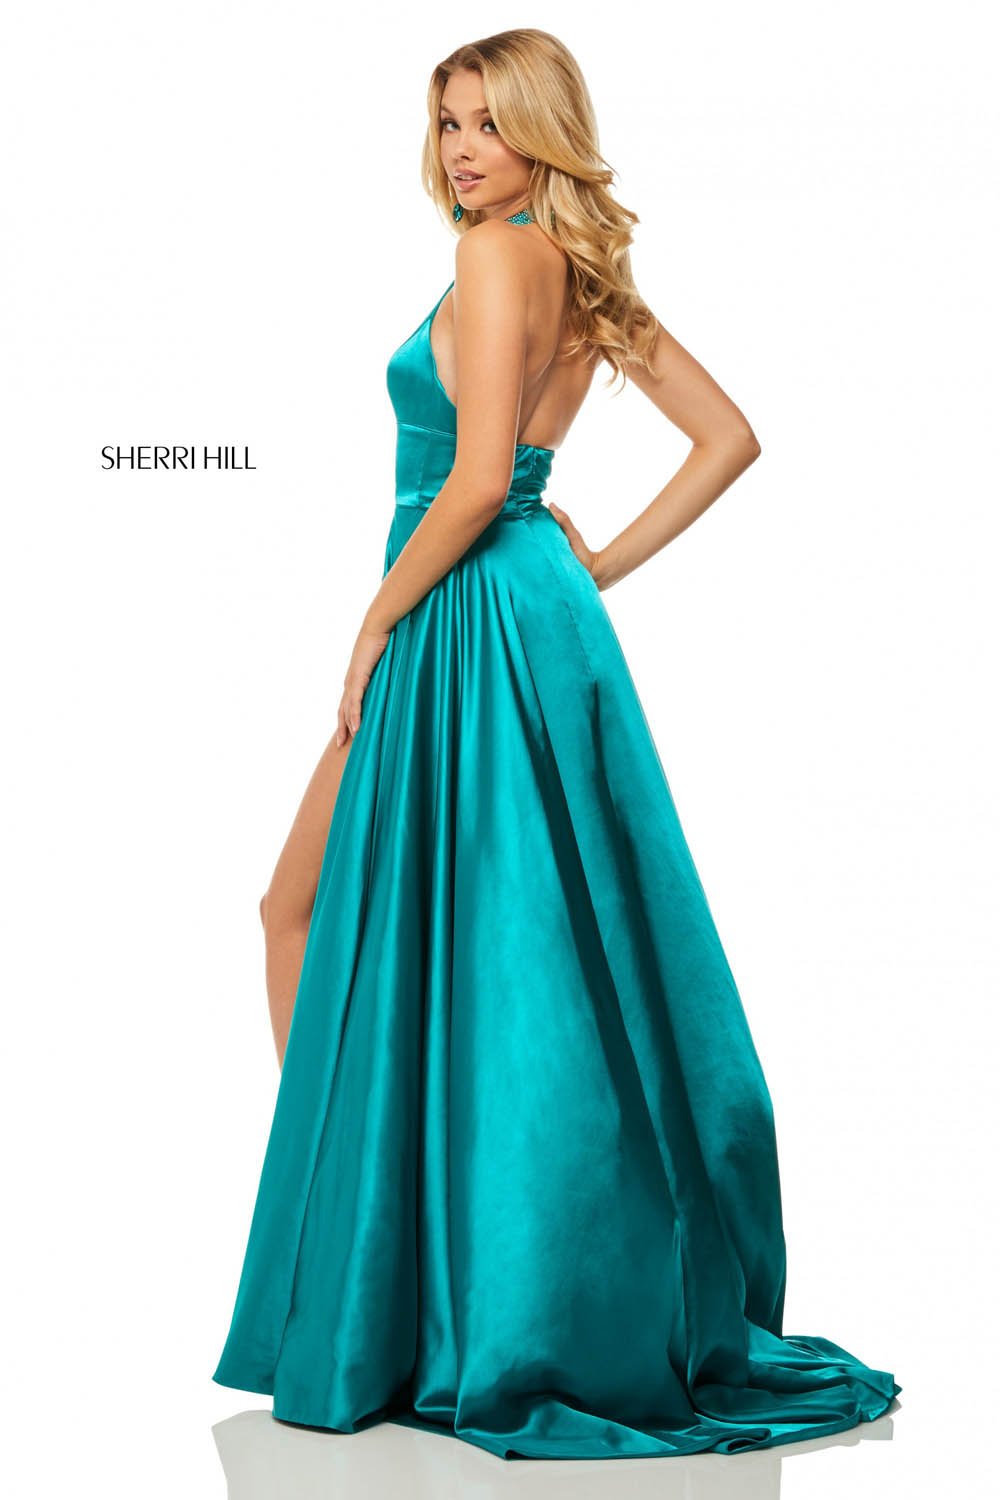 Sherri Hill 52920 dress images in these colors: Mocha, Rose, Blue, Yellow, Red, Lilac, Teal.